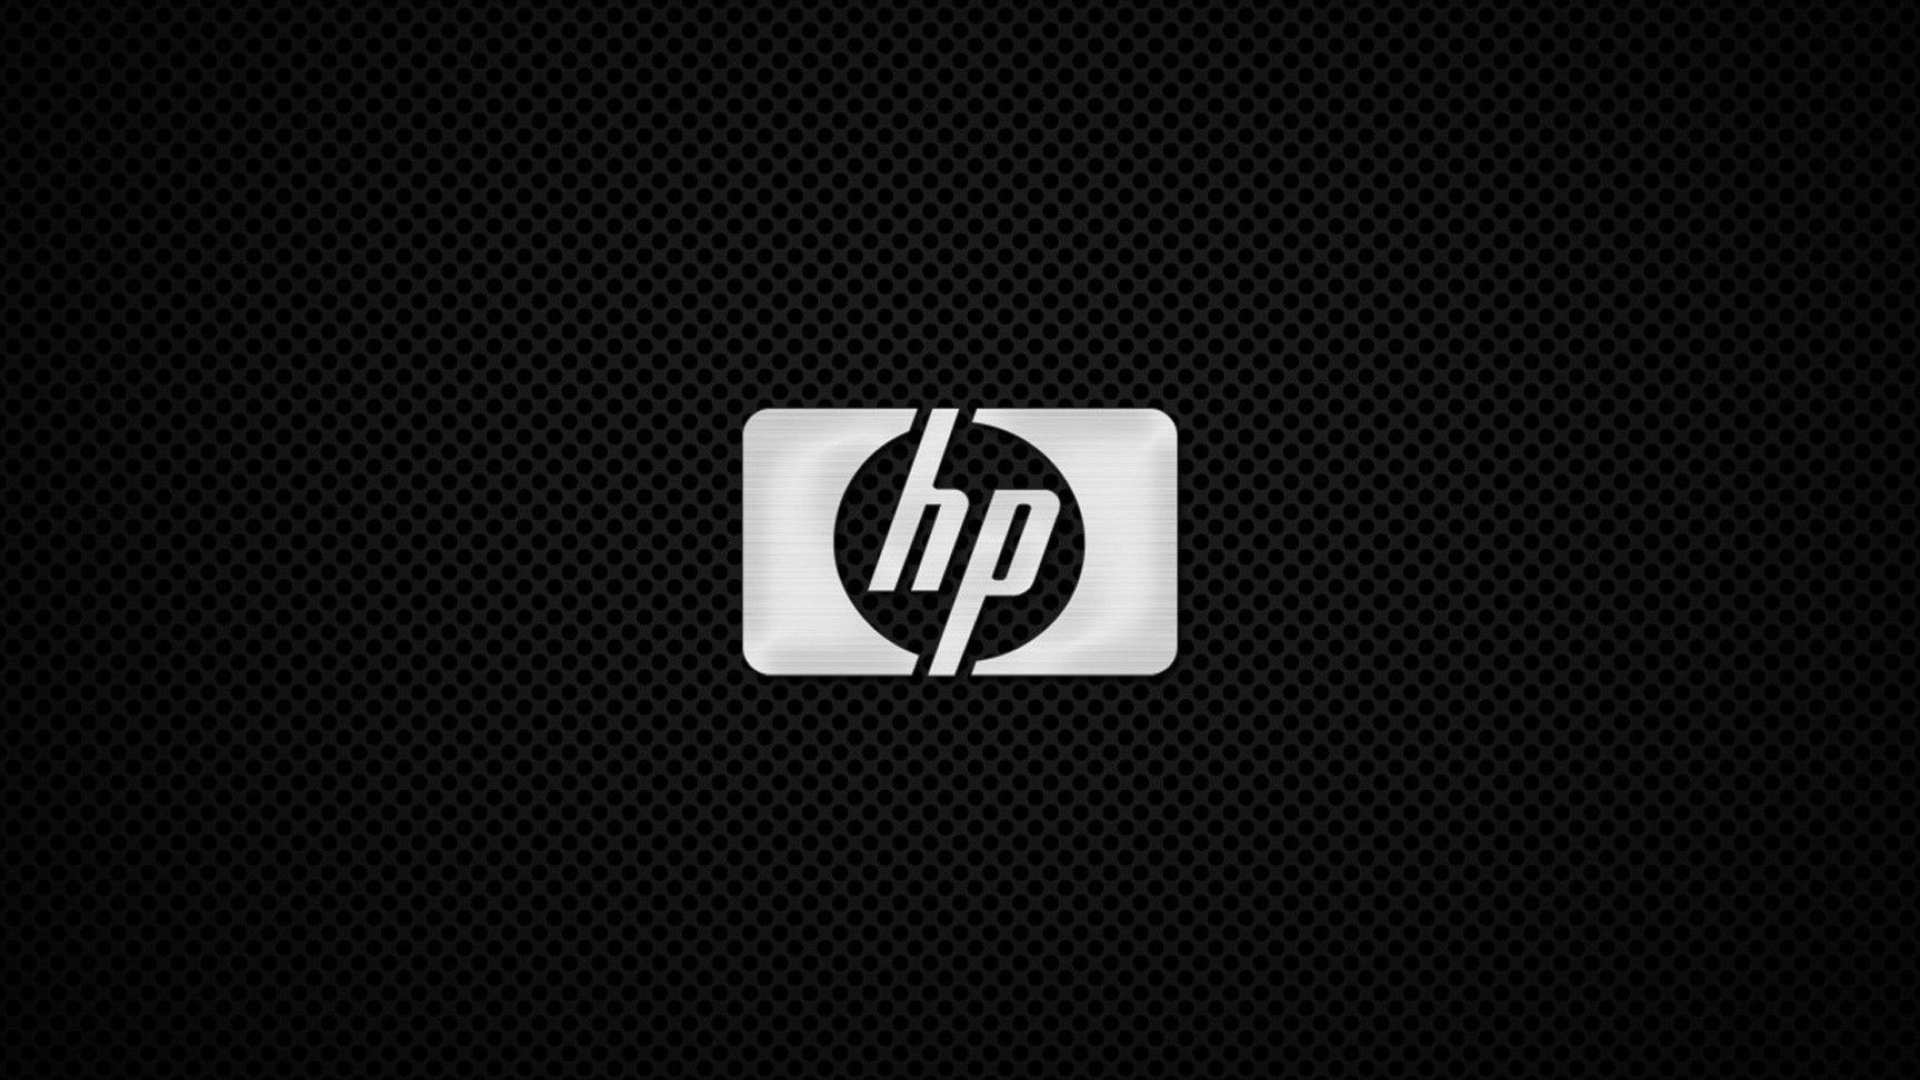 HP, Laptop wallpapers, Top HP backgrounds, HP wallpapers collection, 1920x1080 Full HD Desktop